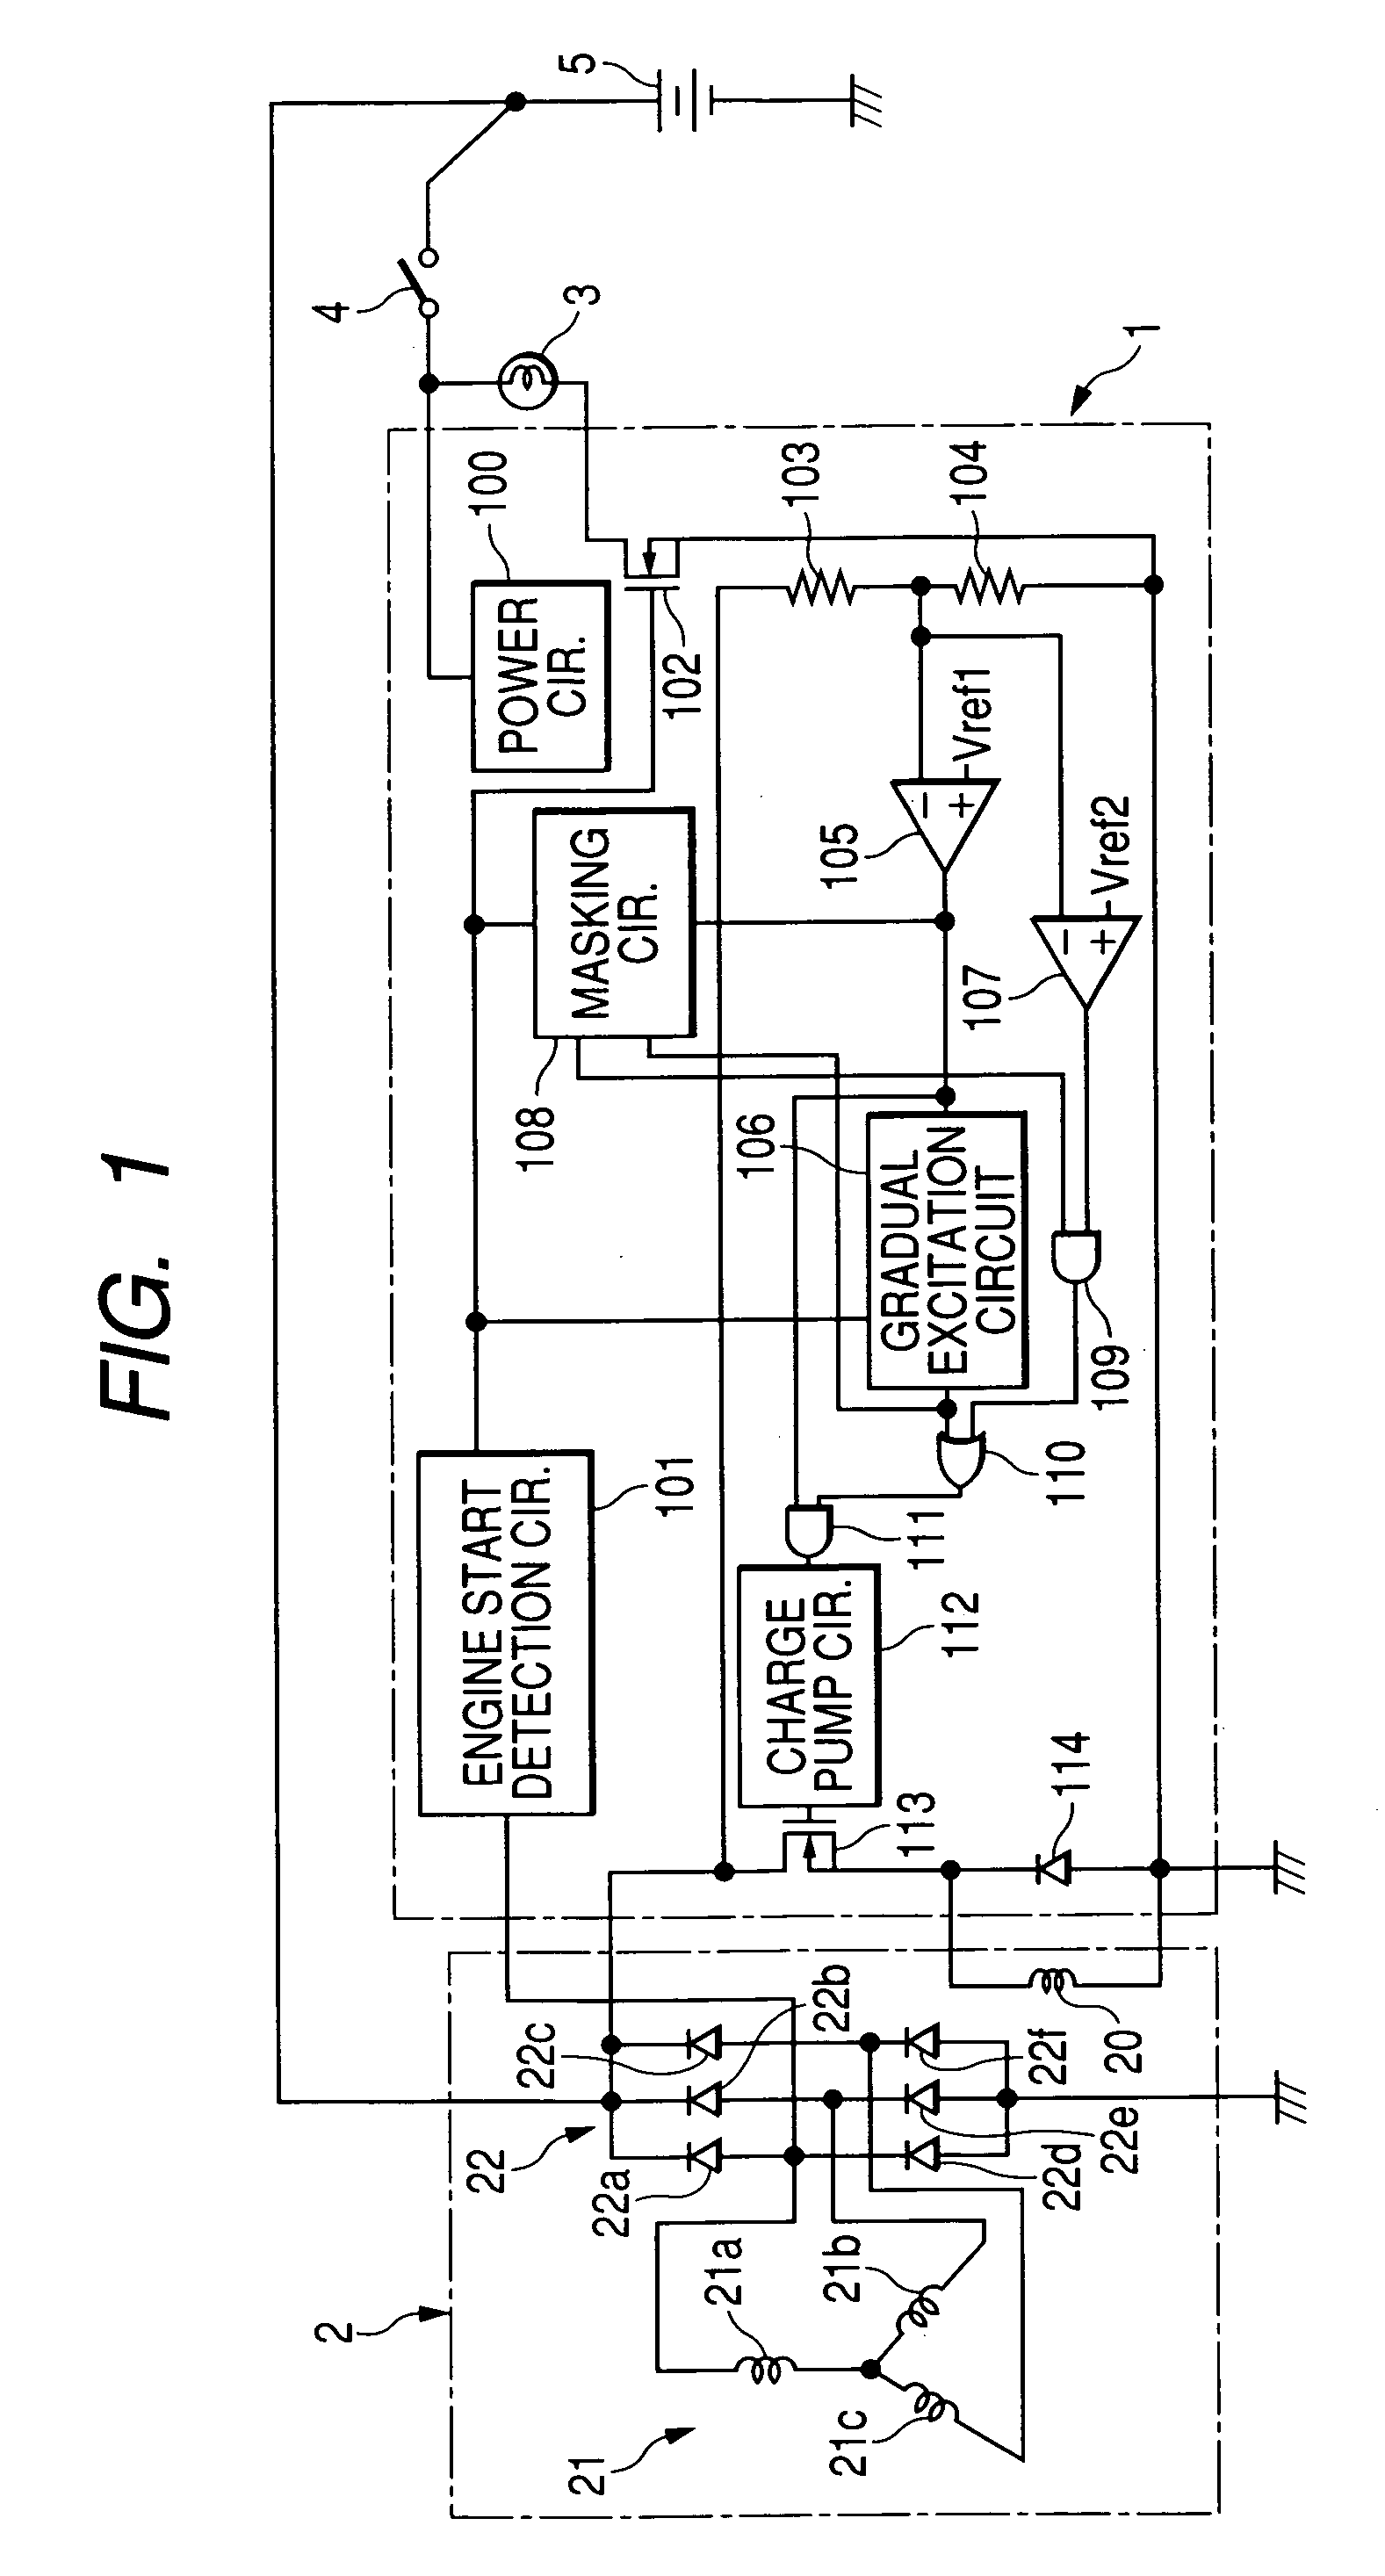 Method and apparatus for controlling power generation using gradually exciting technique